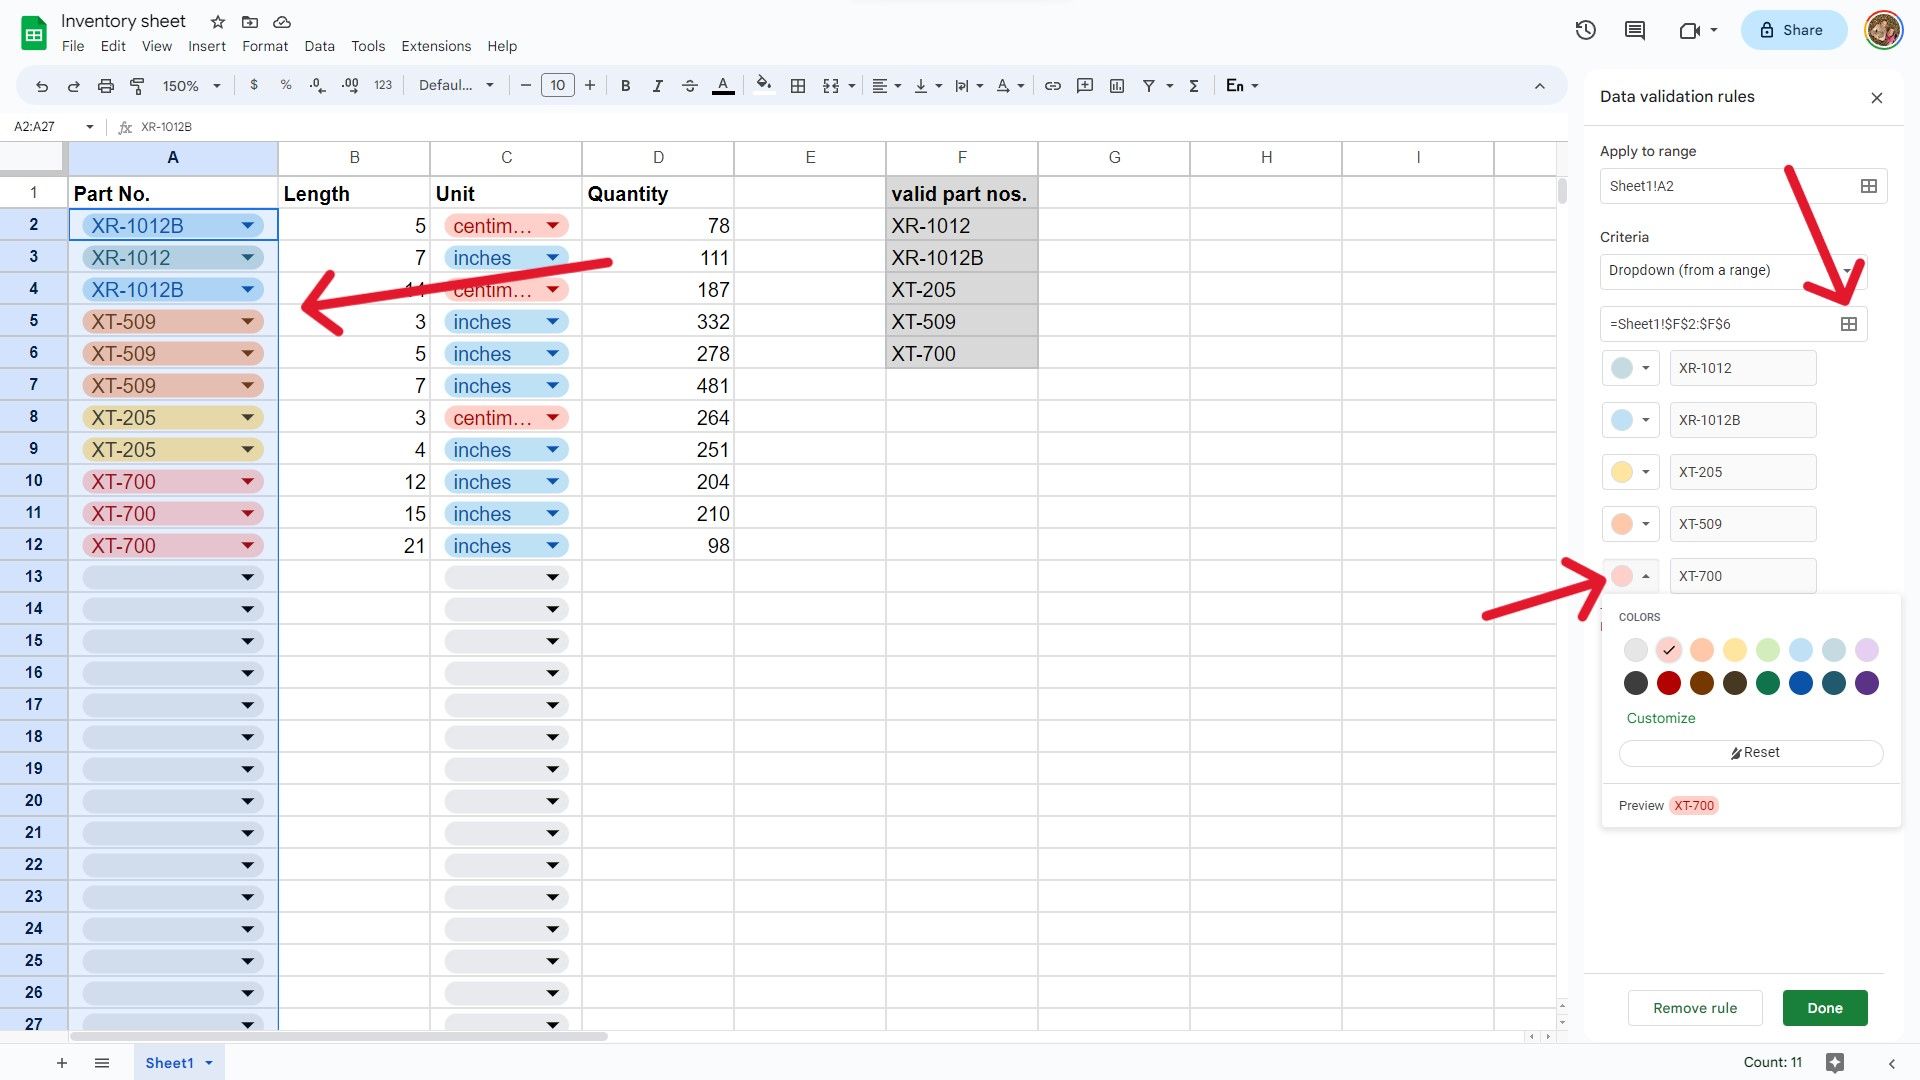 A screenshot of a Google Sheets document showing dropdowns from a data range.